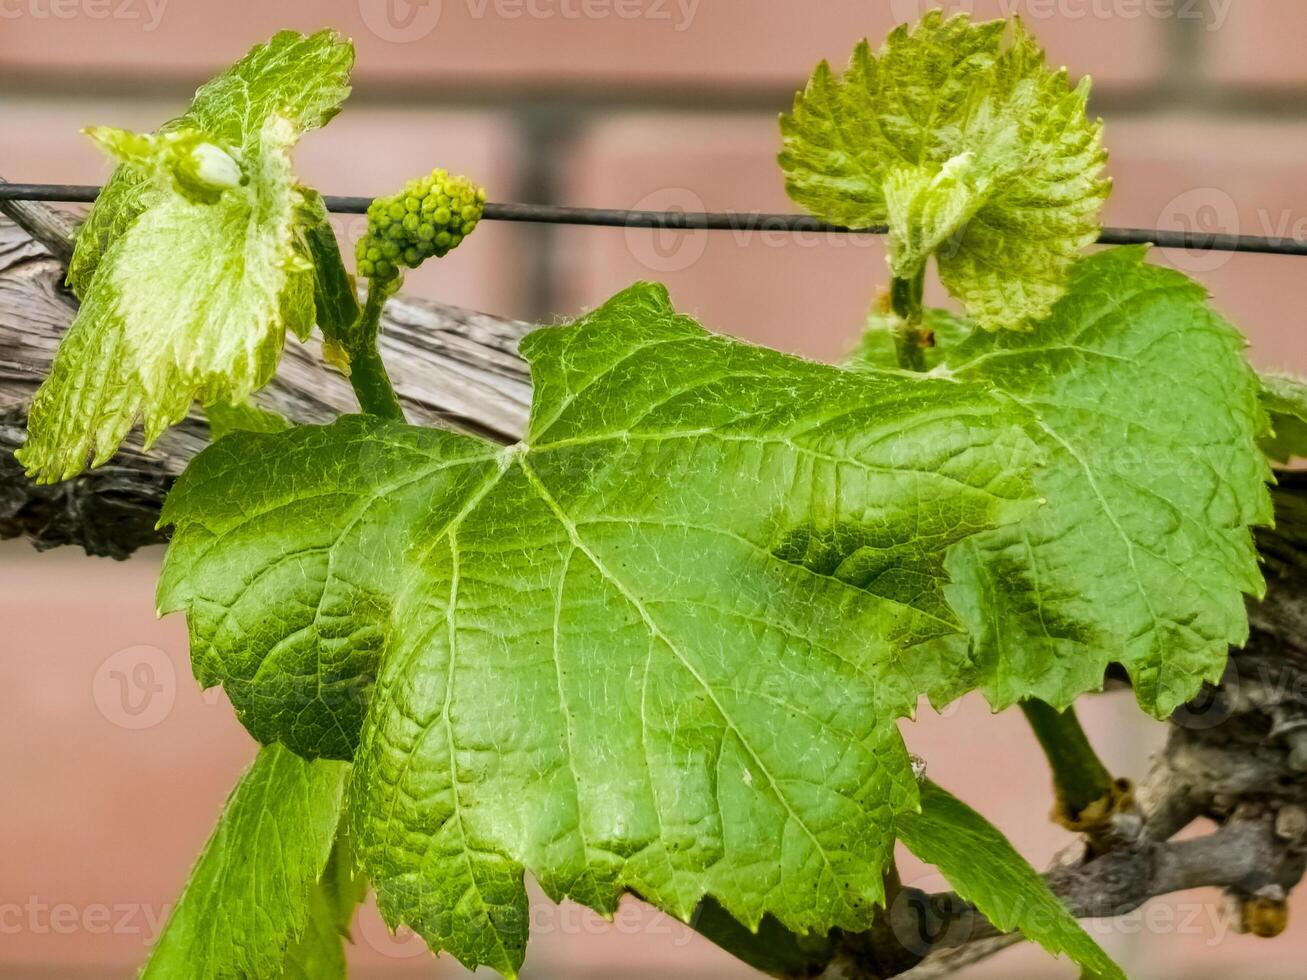 Young leaves and flower buds on a grape vine in spring. Selective focus photo